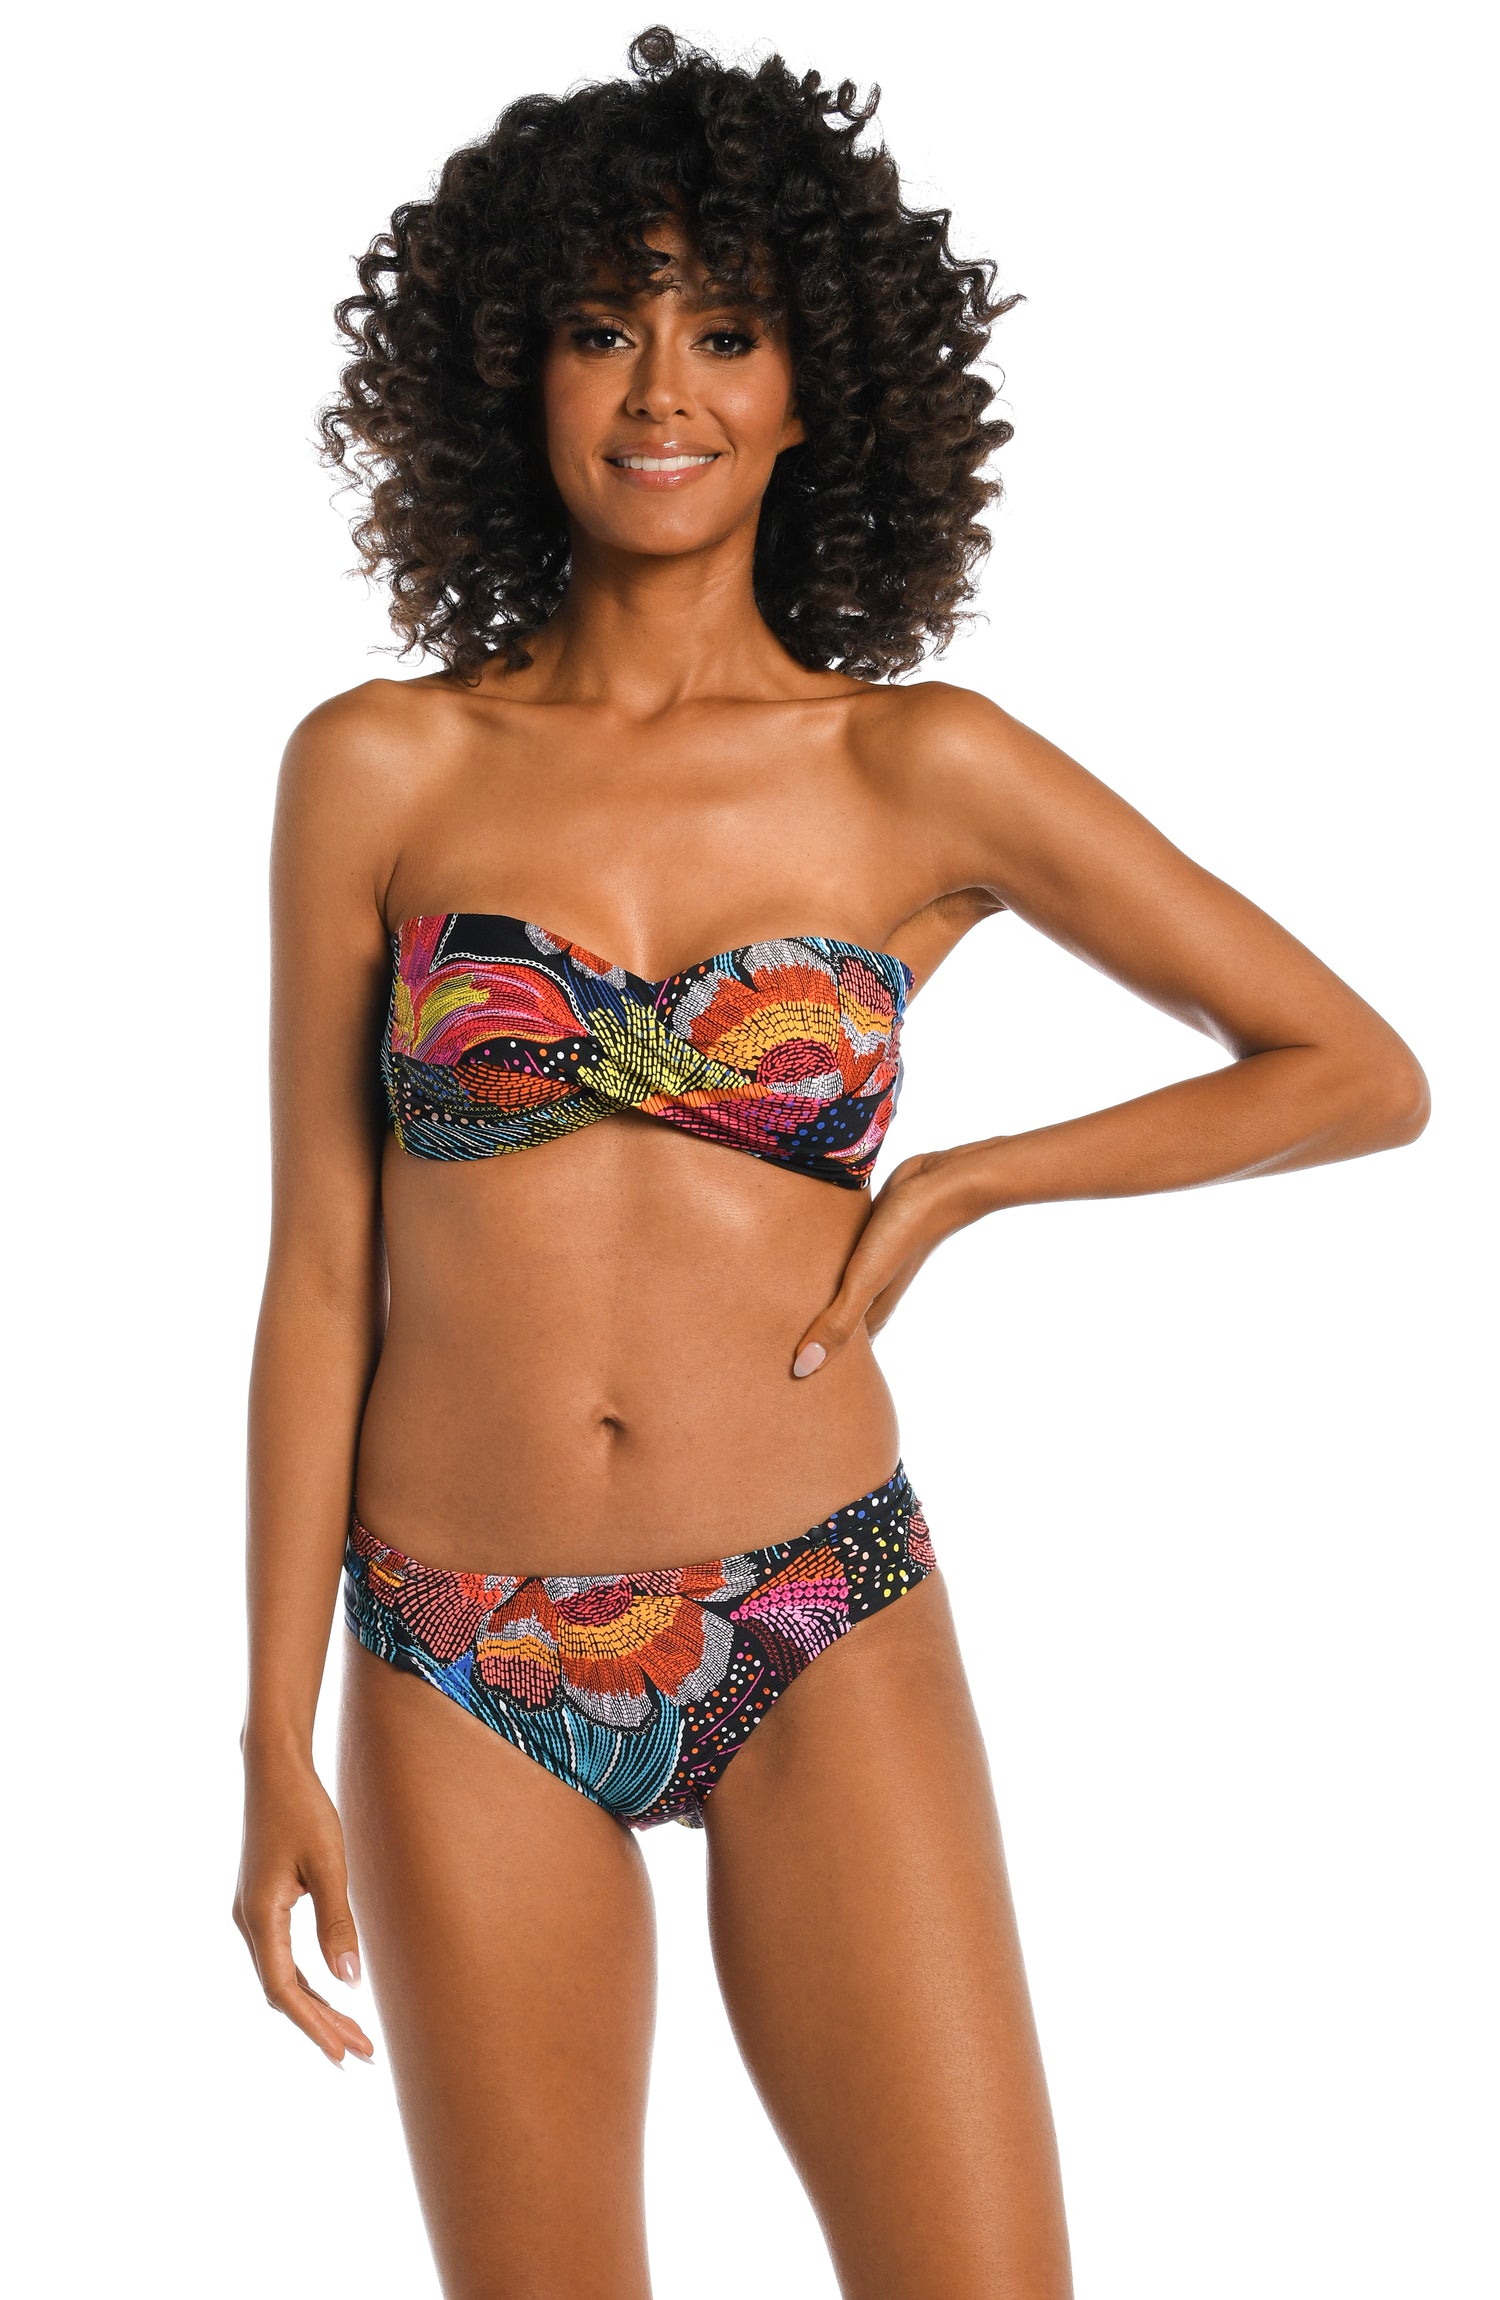 Model is wearing a shiny multicolored tropical printed bandeau top from our Sunlit Soriee collection!